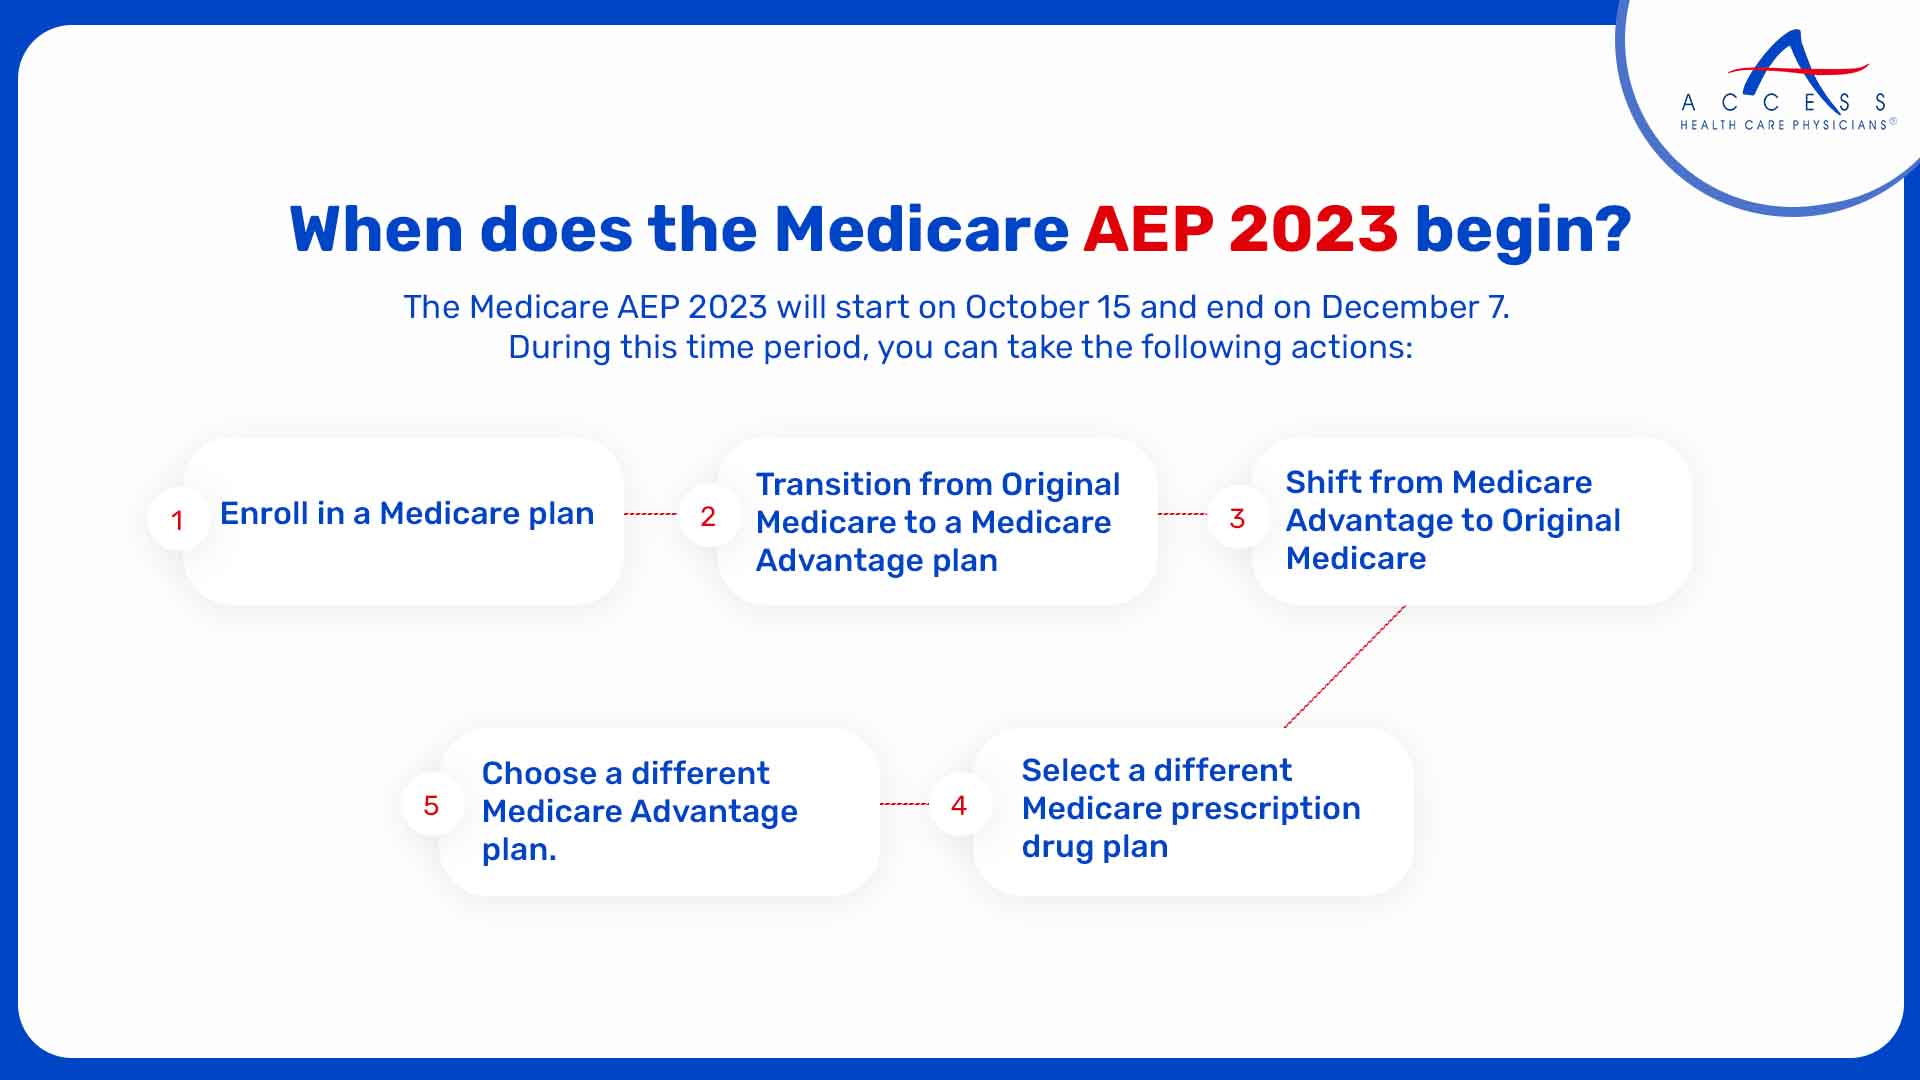 When does the Medicare AEP 2023 begin?